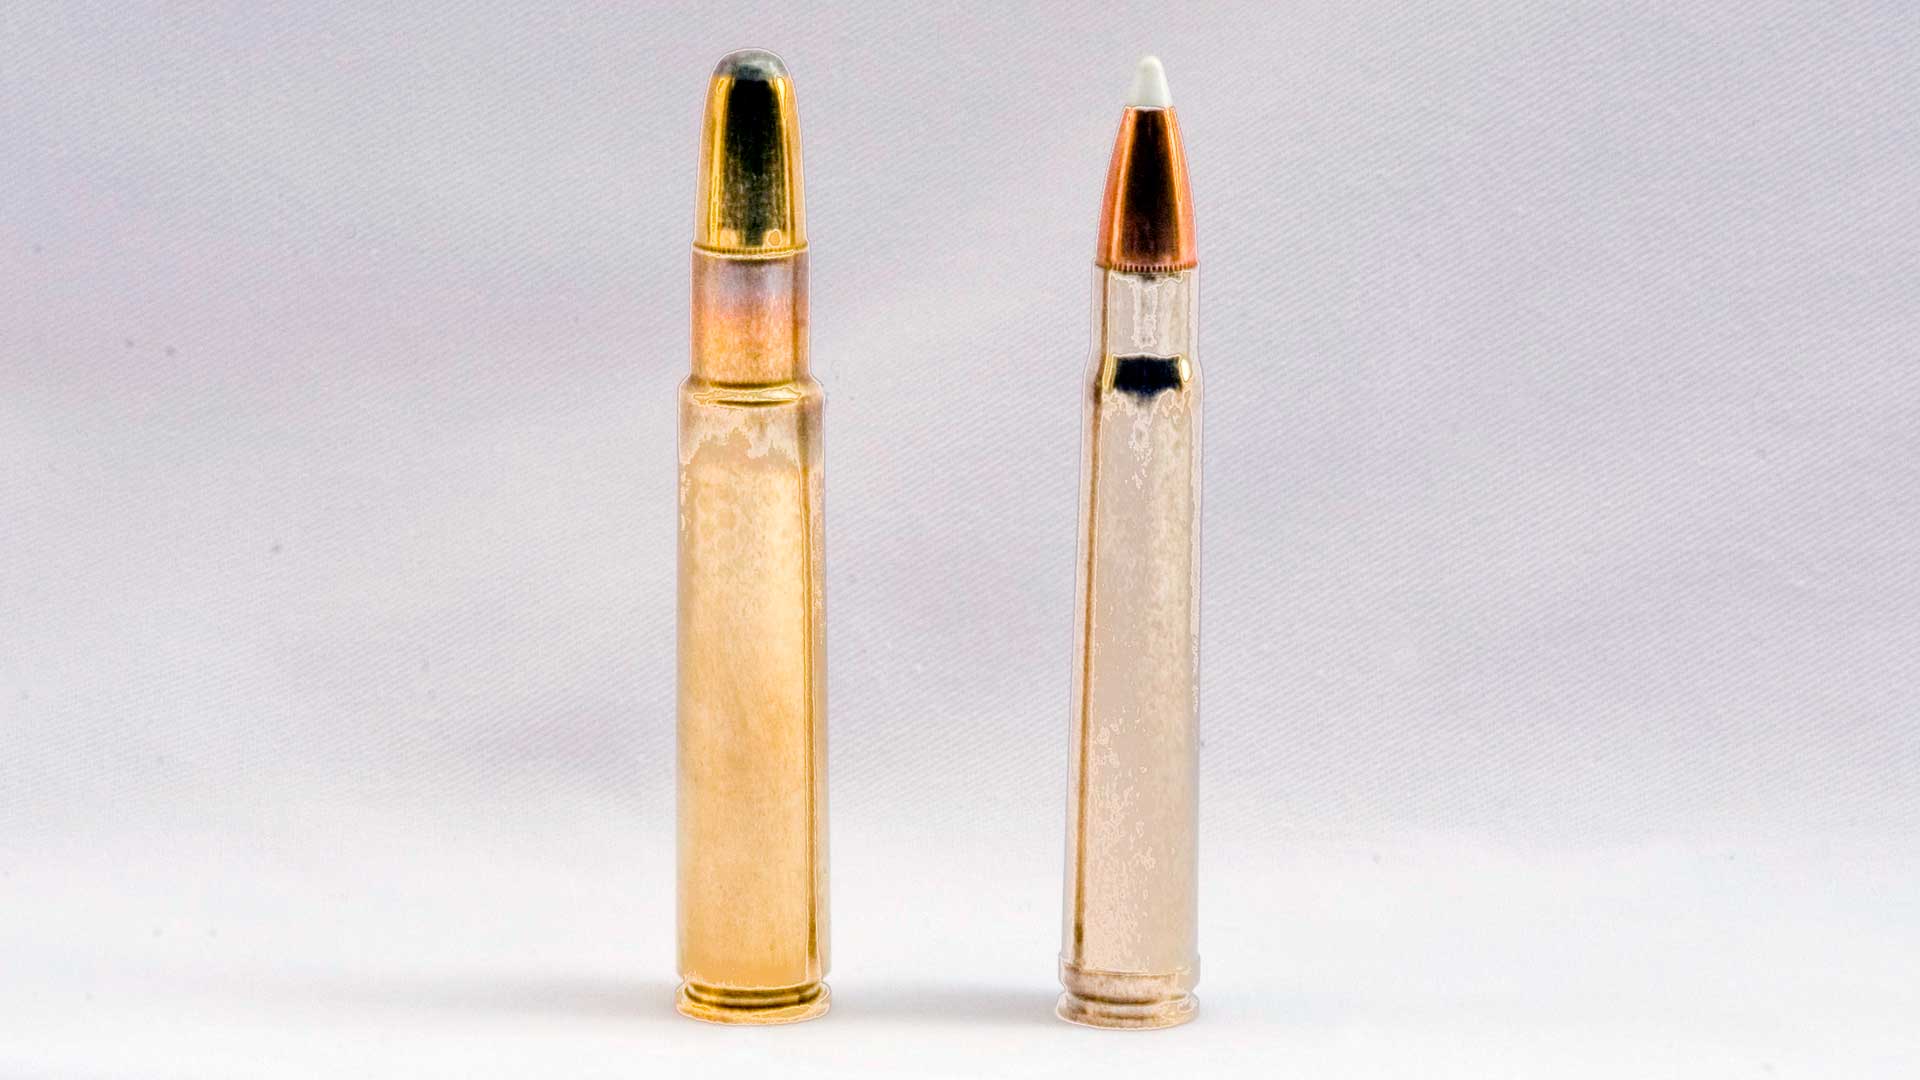 The .416 Rigby, left, is shown next to a .375 Holland & Holland cartridge.